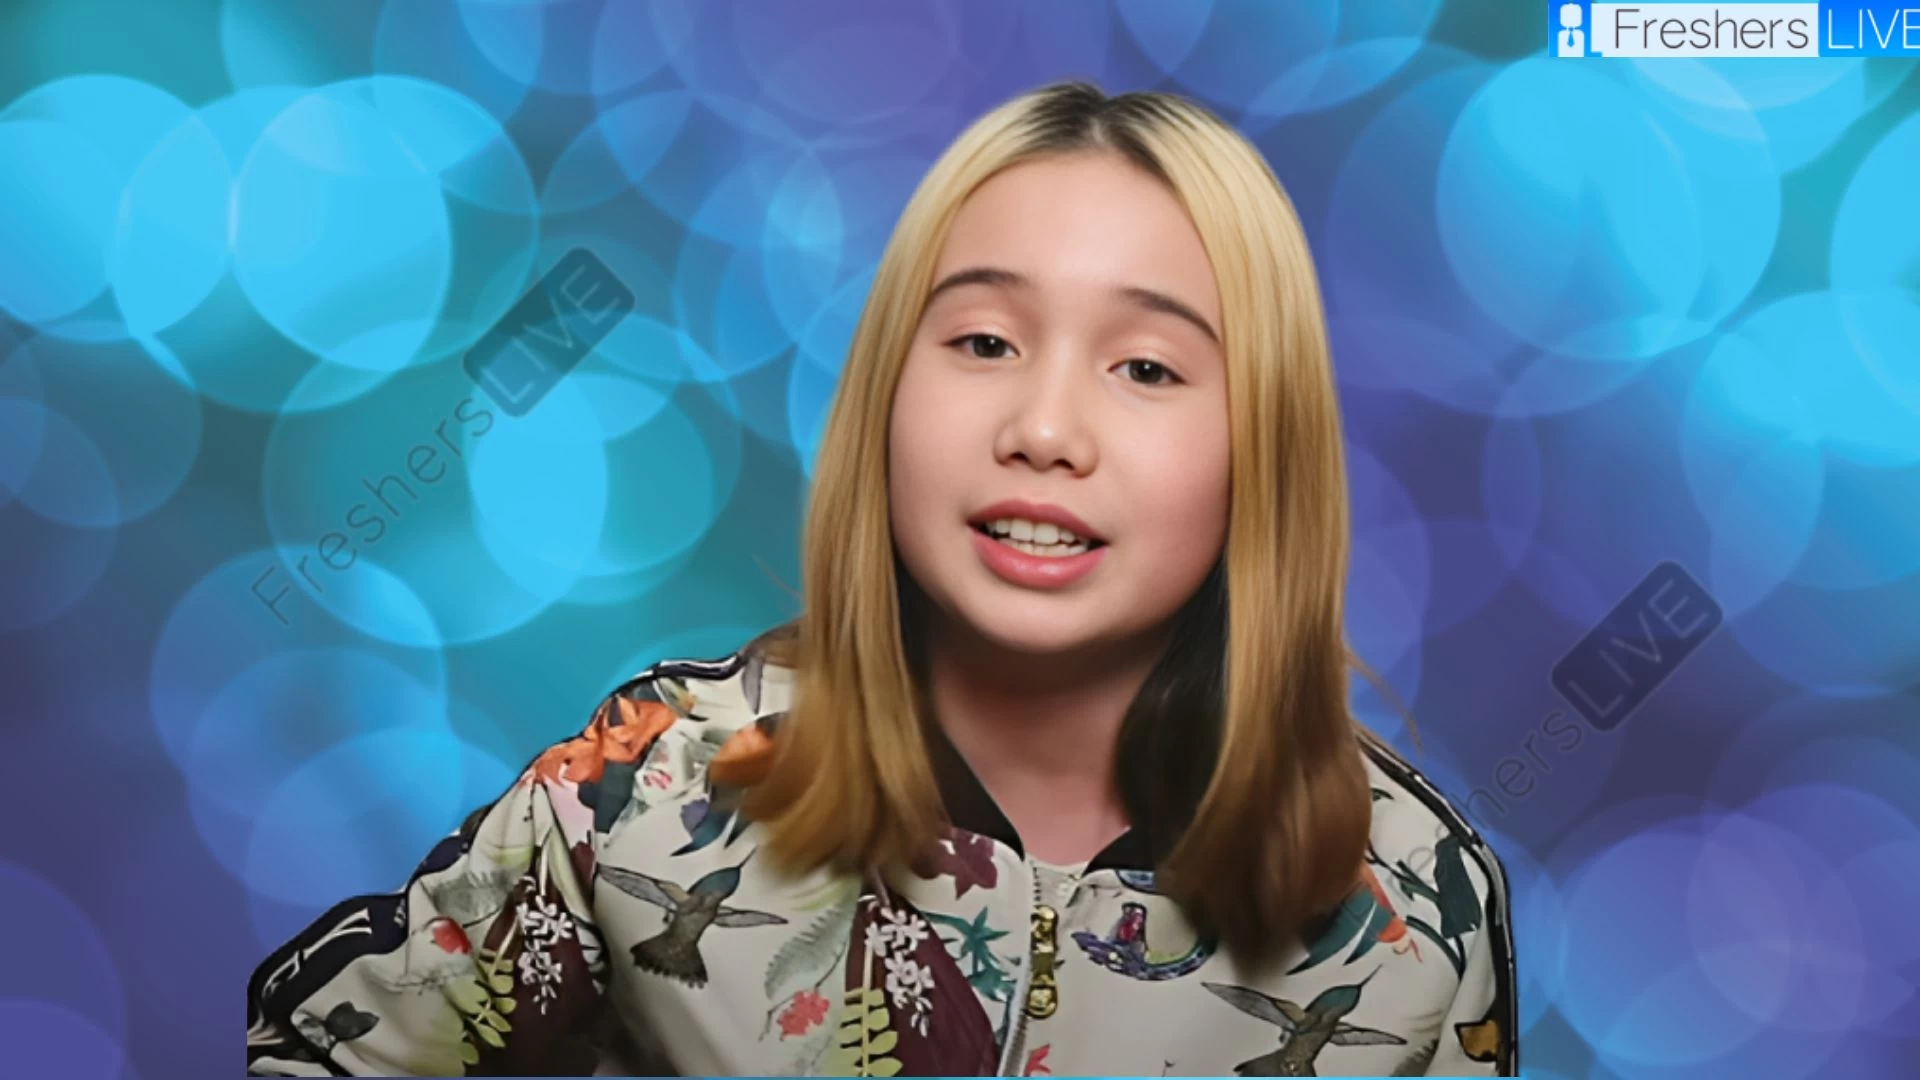 Lil Tay Ethnicity, What is Lil Tay's Ethnicity?